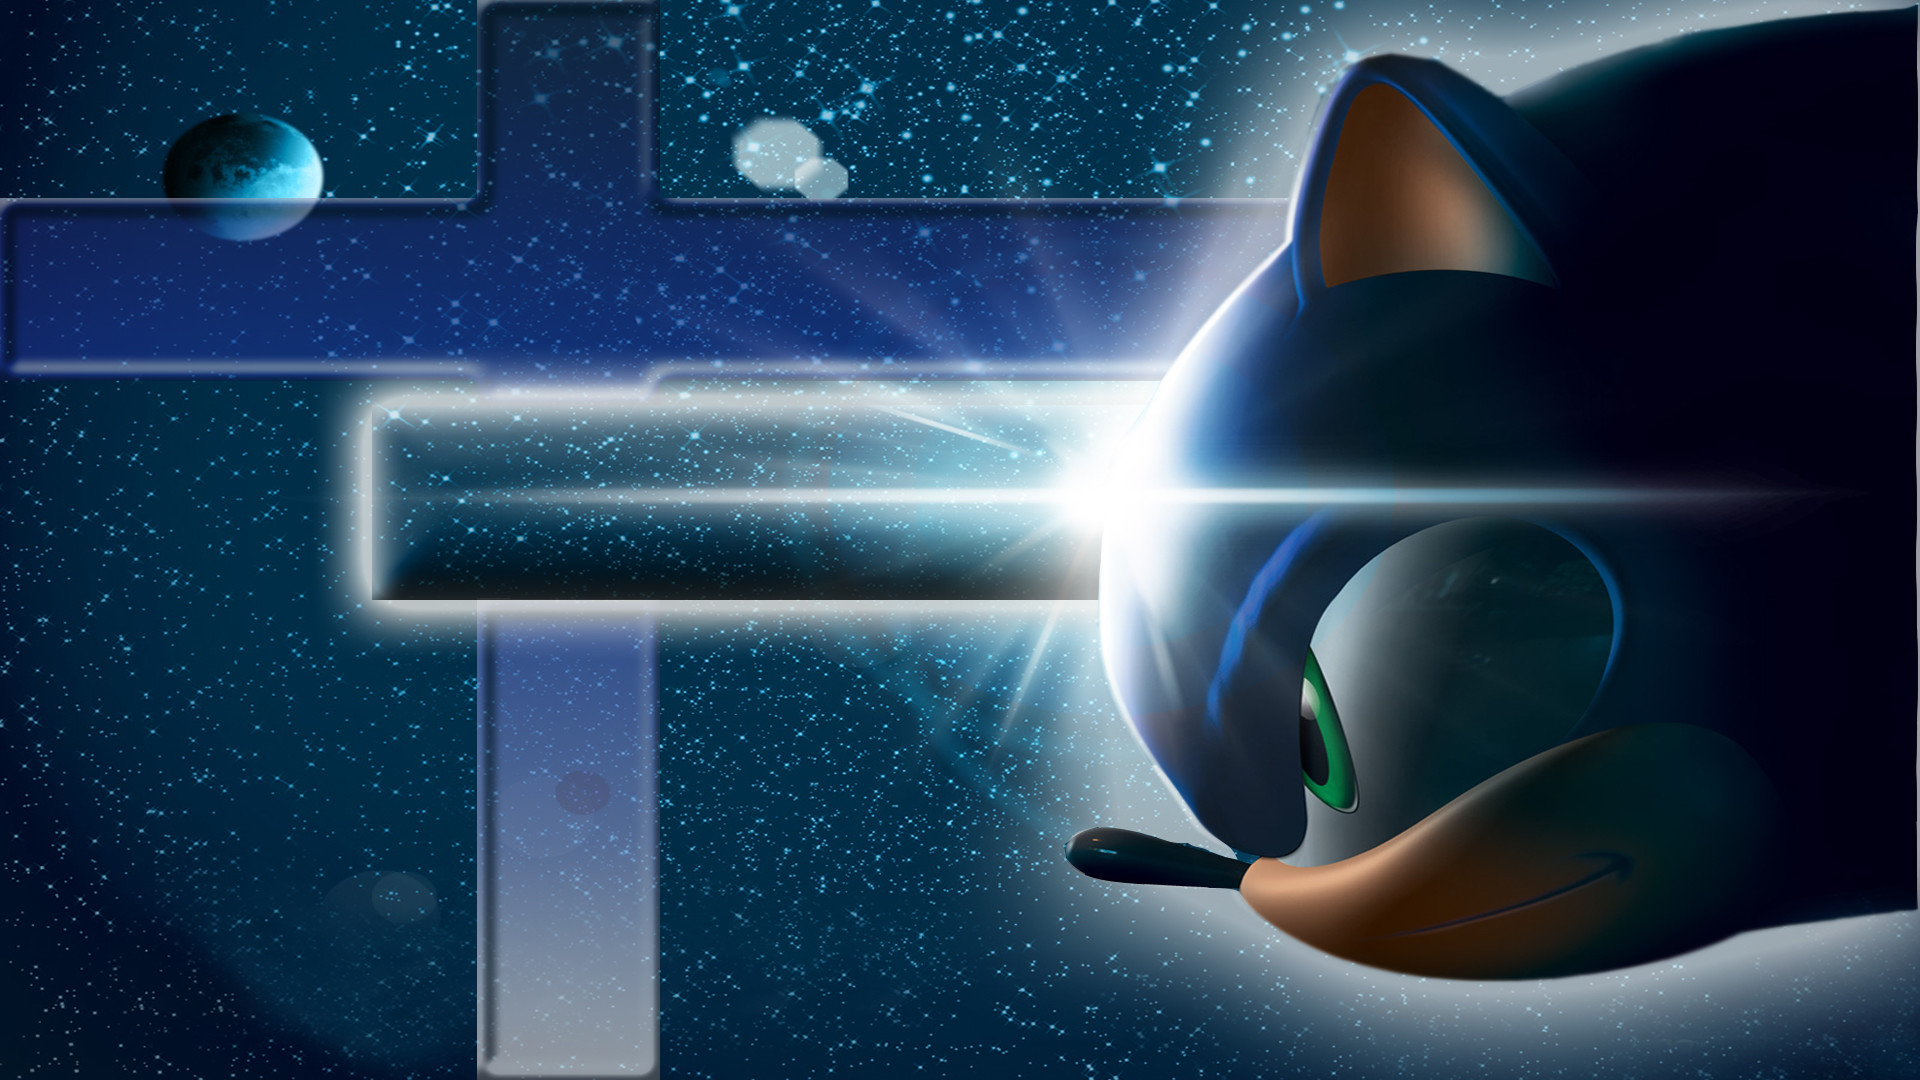 1920x1080 PS3 Video Game Sonic The Hedgehog.